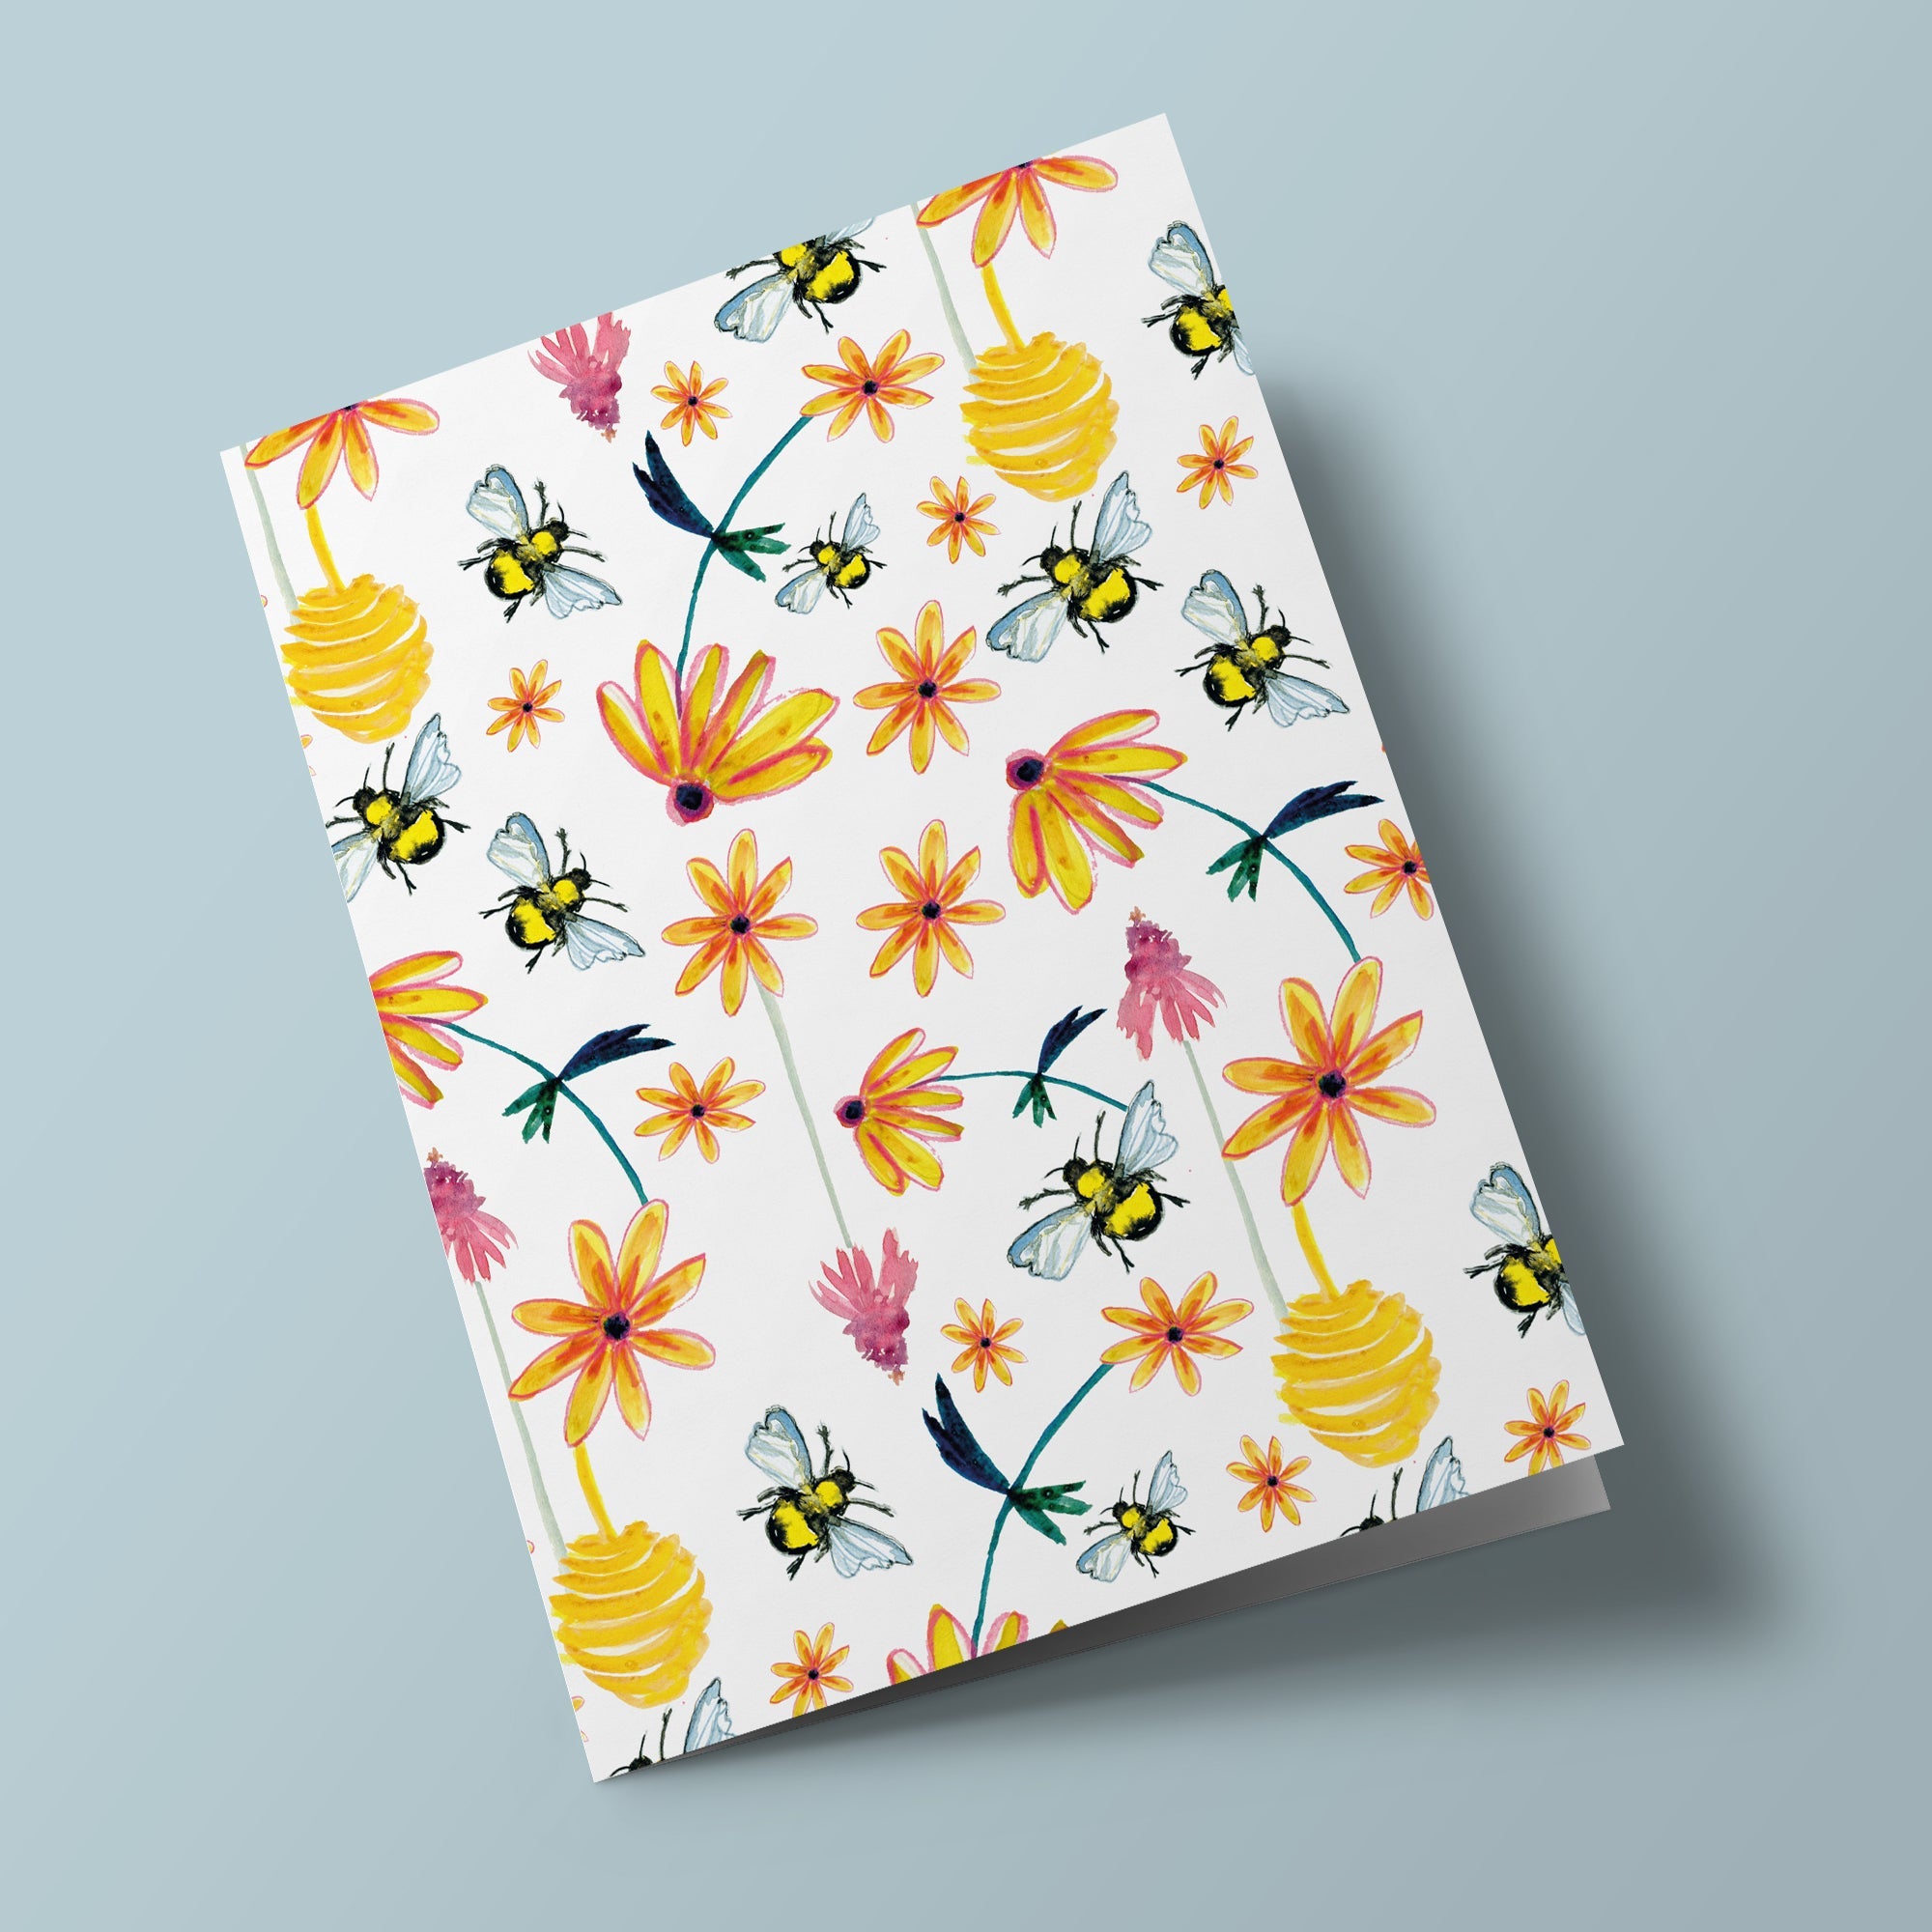 Bees, Nests and Flowers - Plantable Card